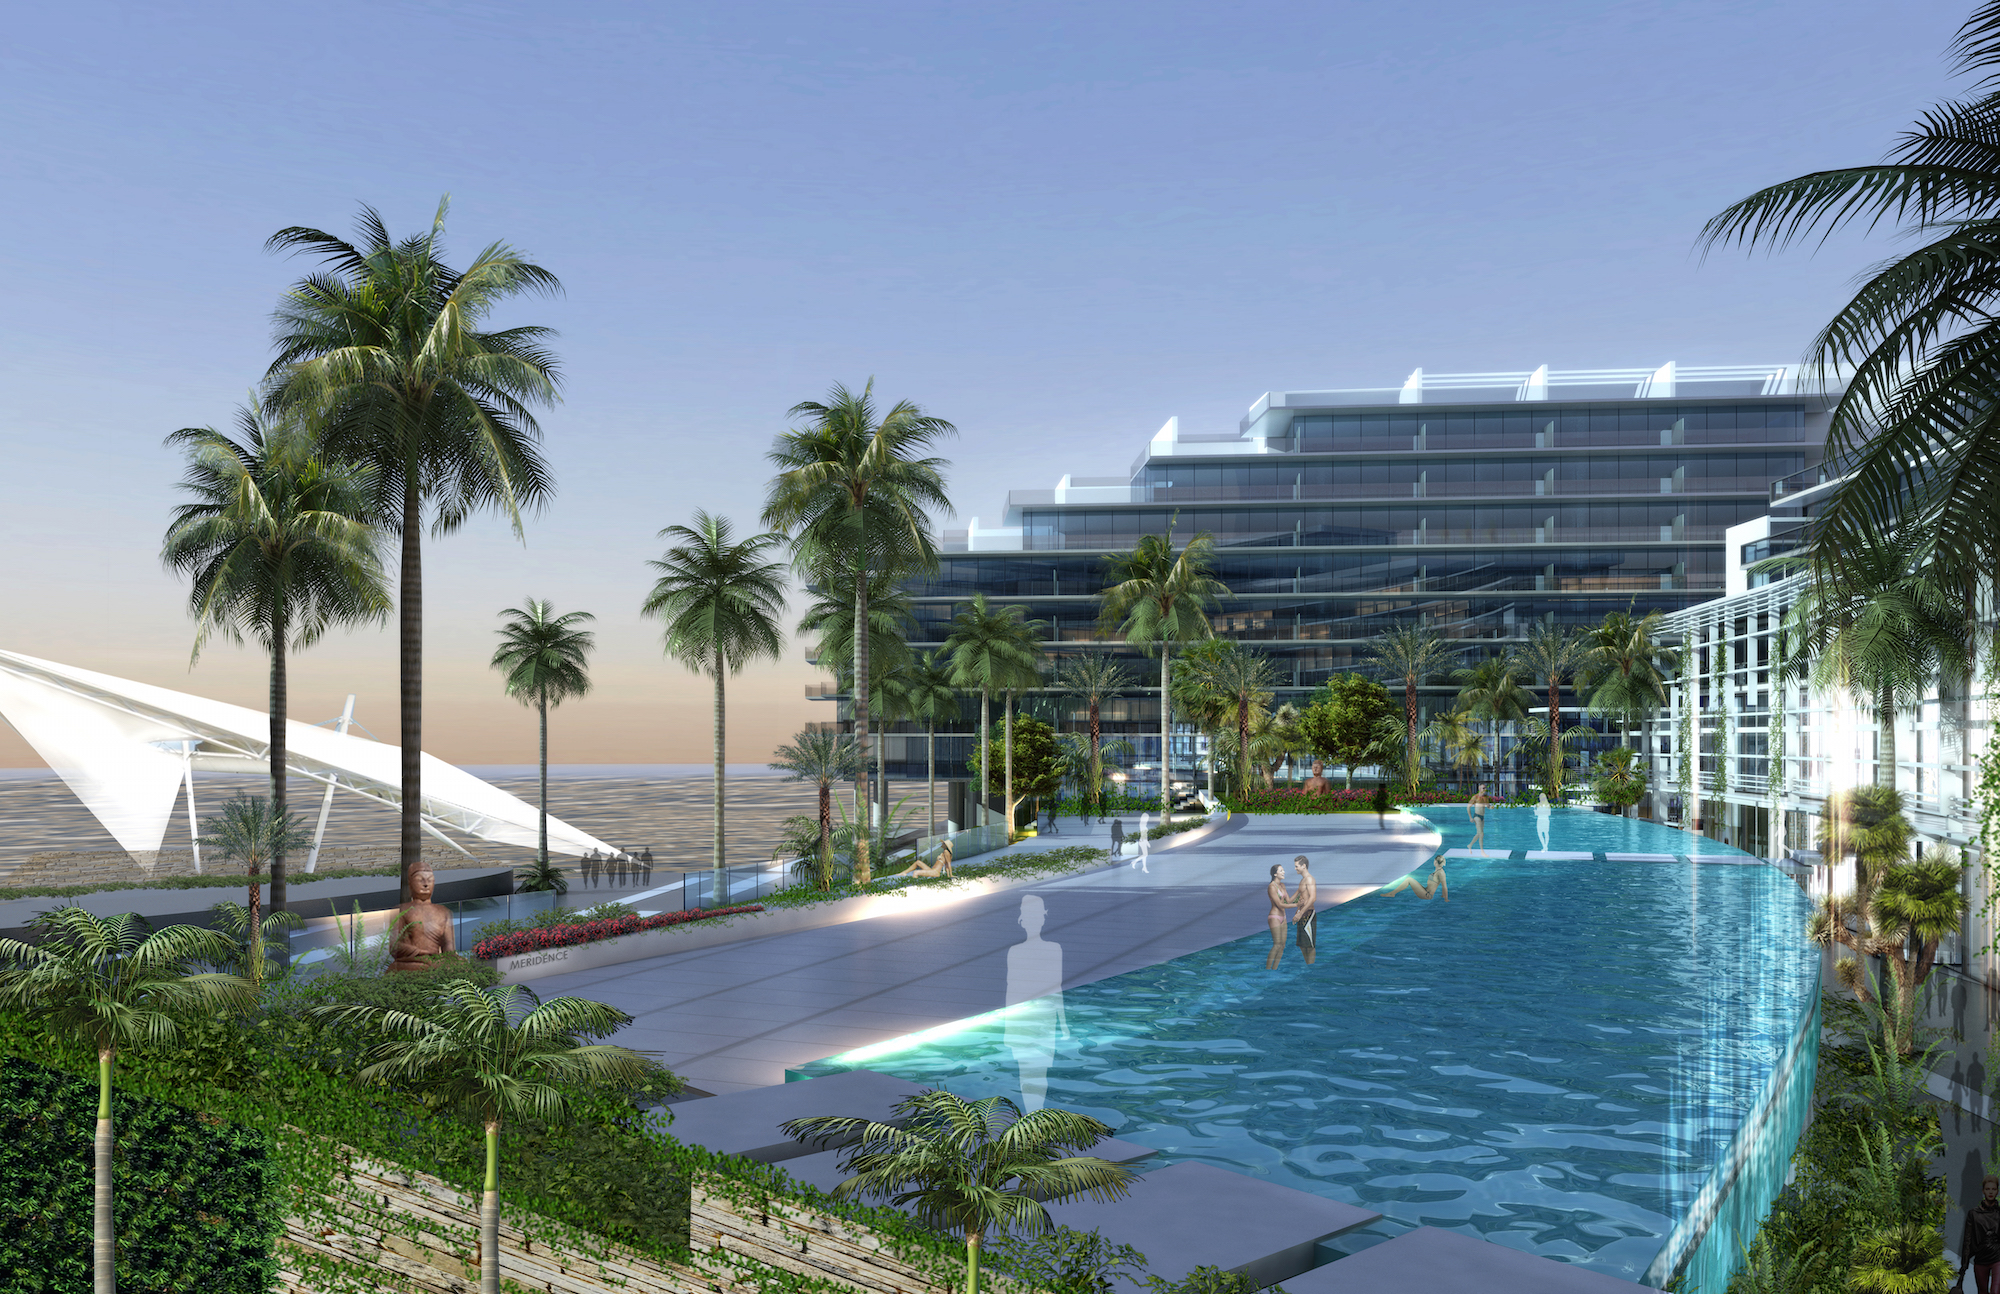 The Pointe's ocean-front hotel includes 200 guest rooms, music and entertainment venue.